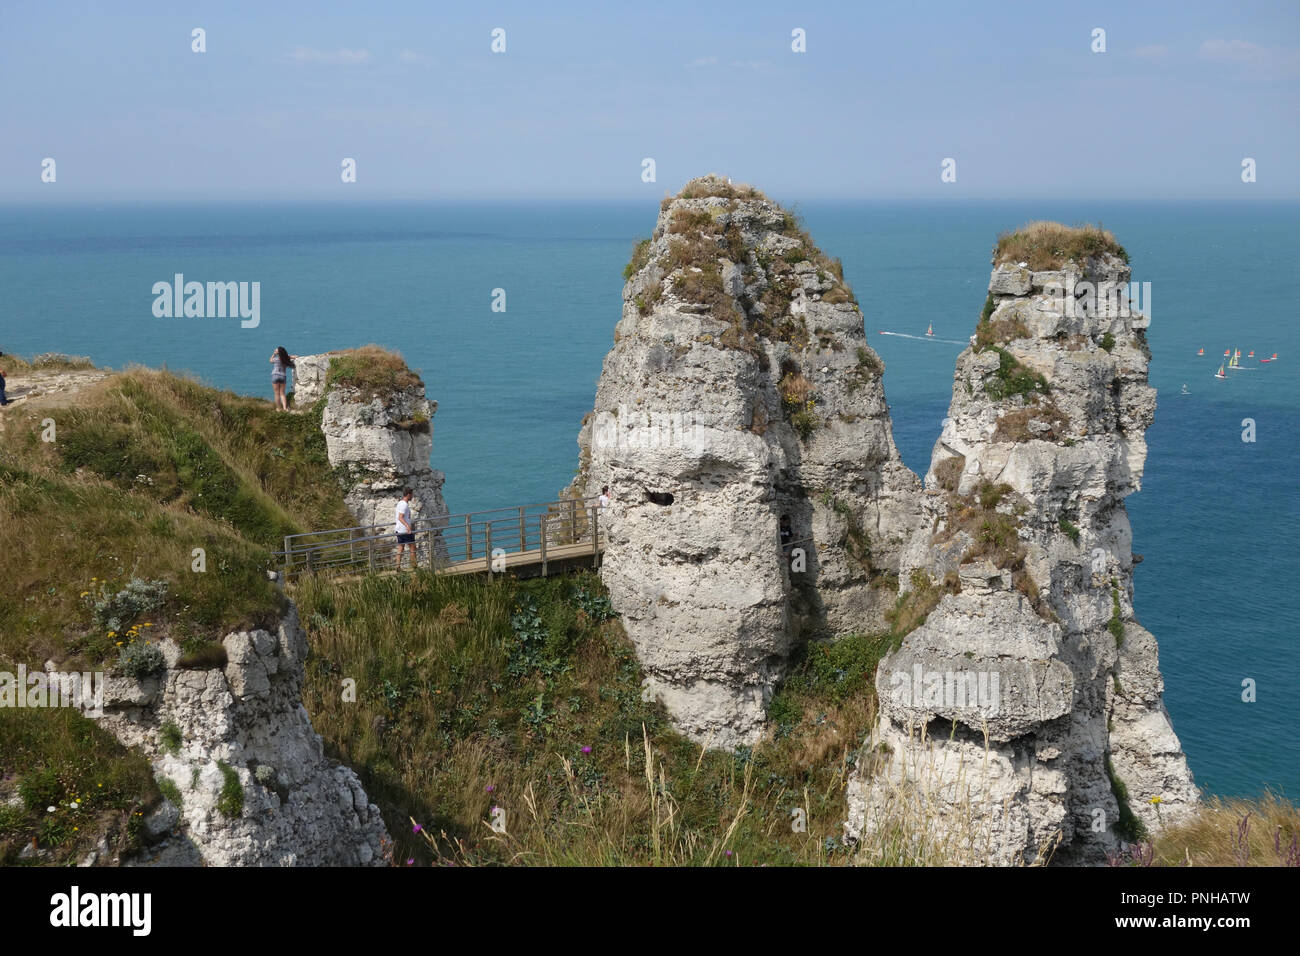 detail of clifftops at Etretat, Normandy France Stock Photo